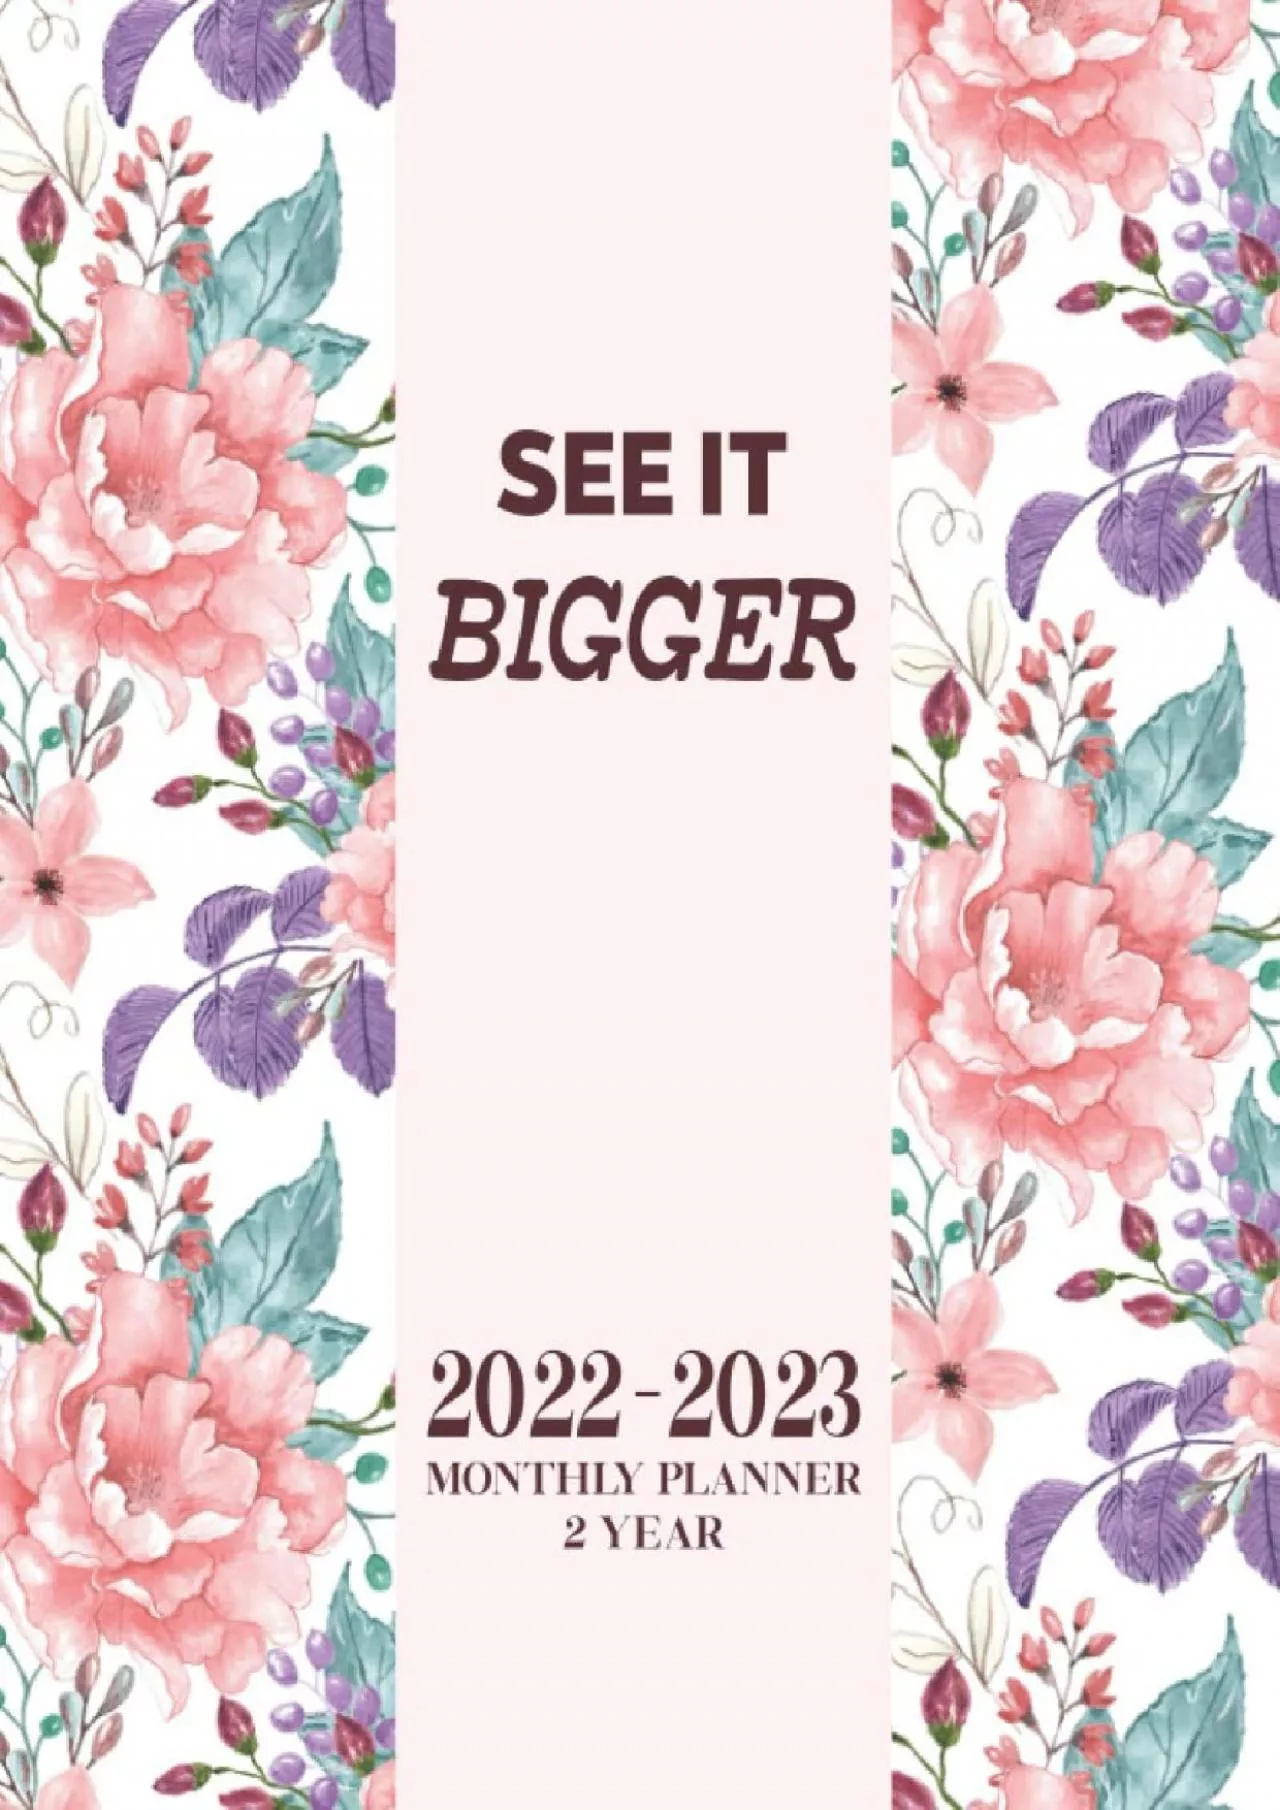 [READ]-See it Bigger Planner 2022-2023 Monthly: January 2022 to December 2023 with Contacts